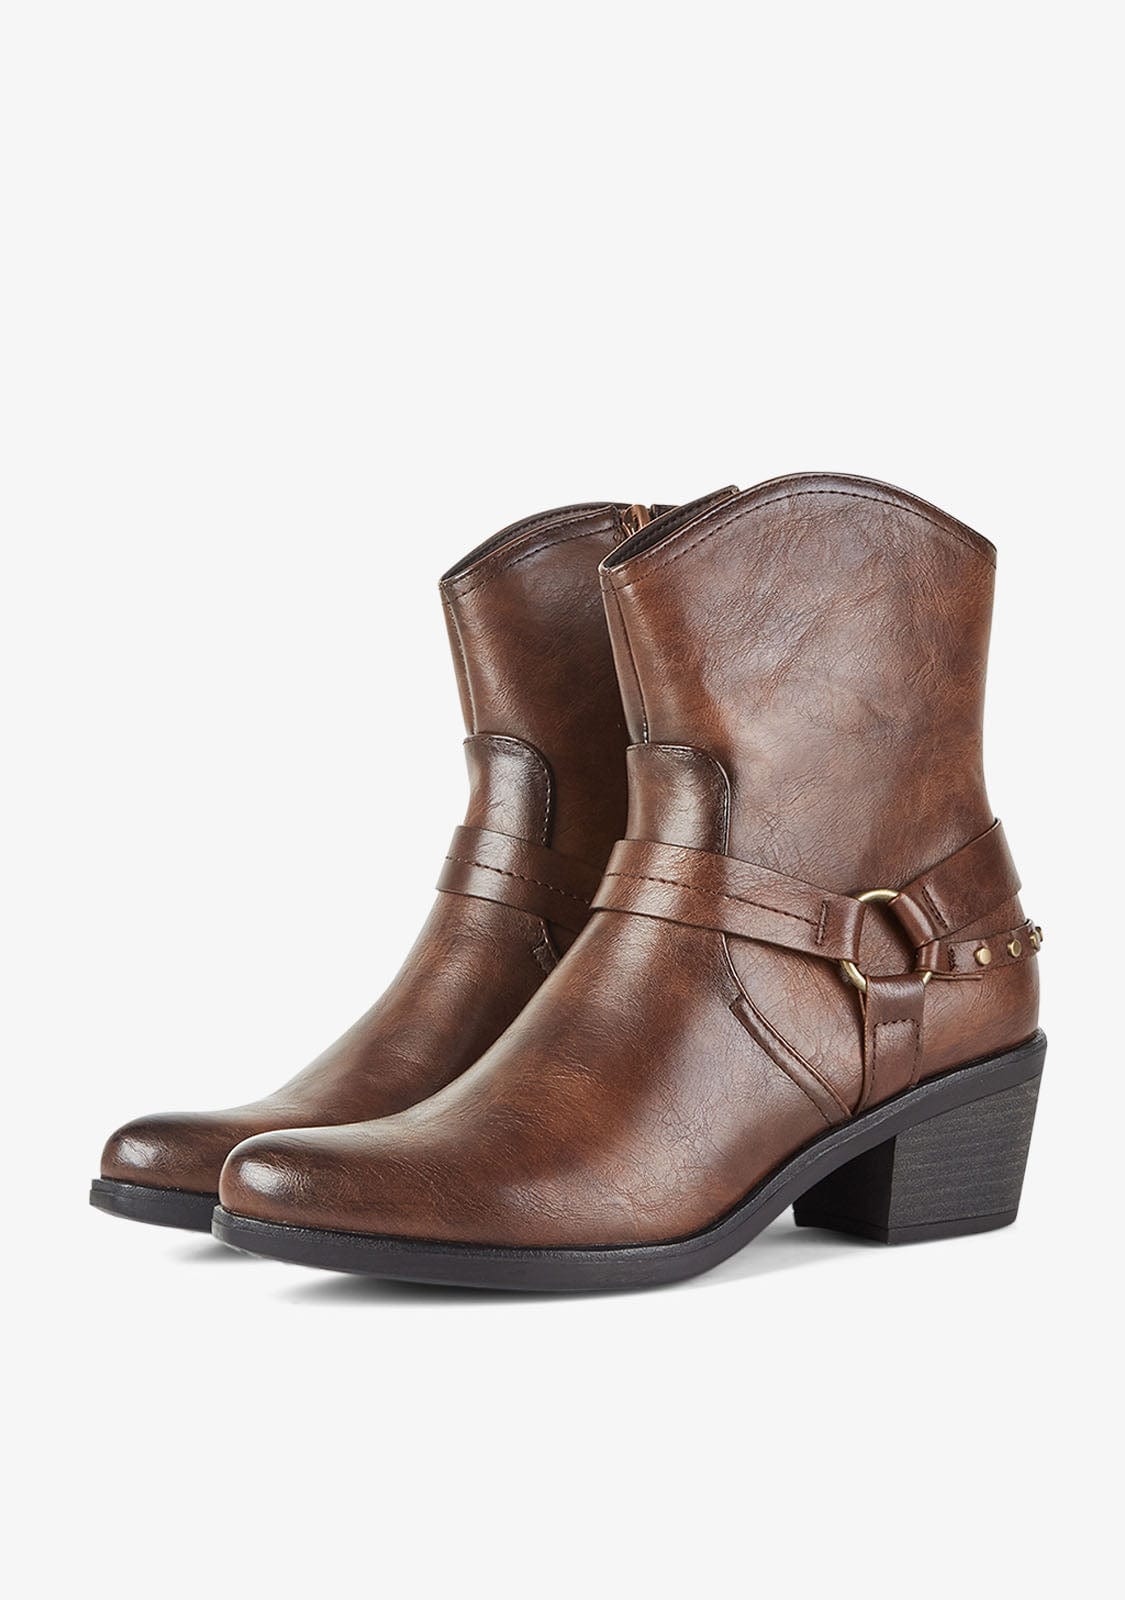 Ankle Boots Cowboy West Brown Buffalo